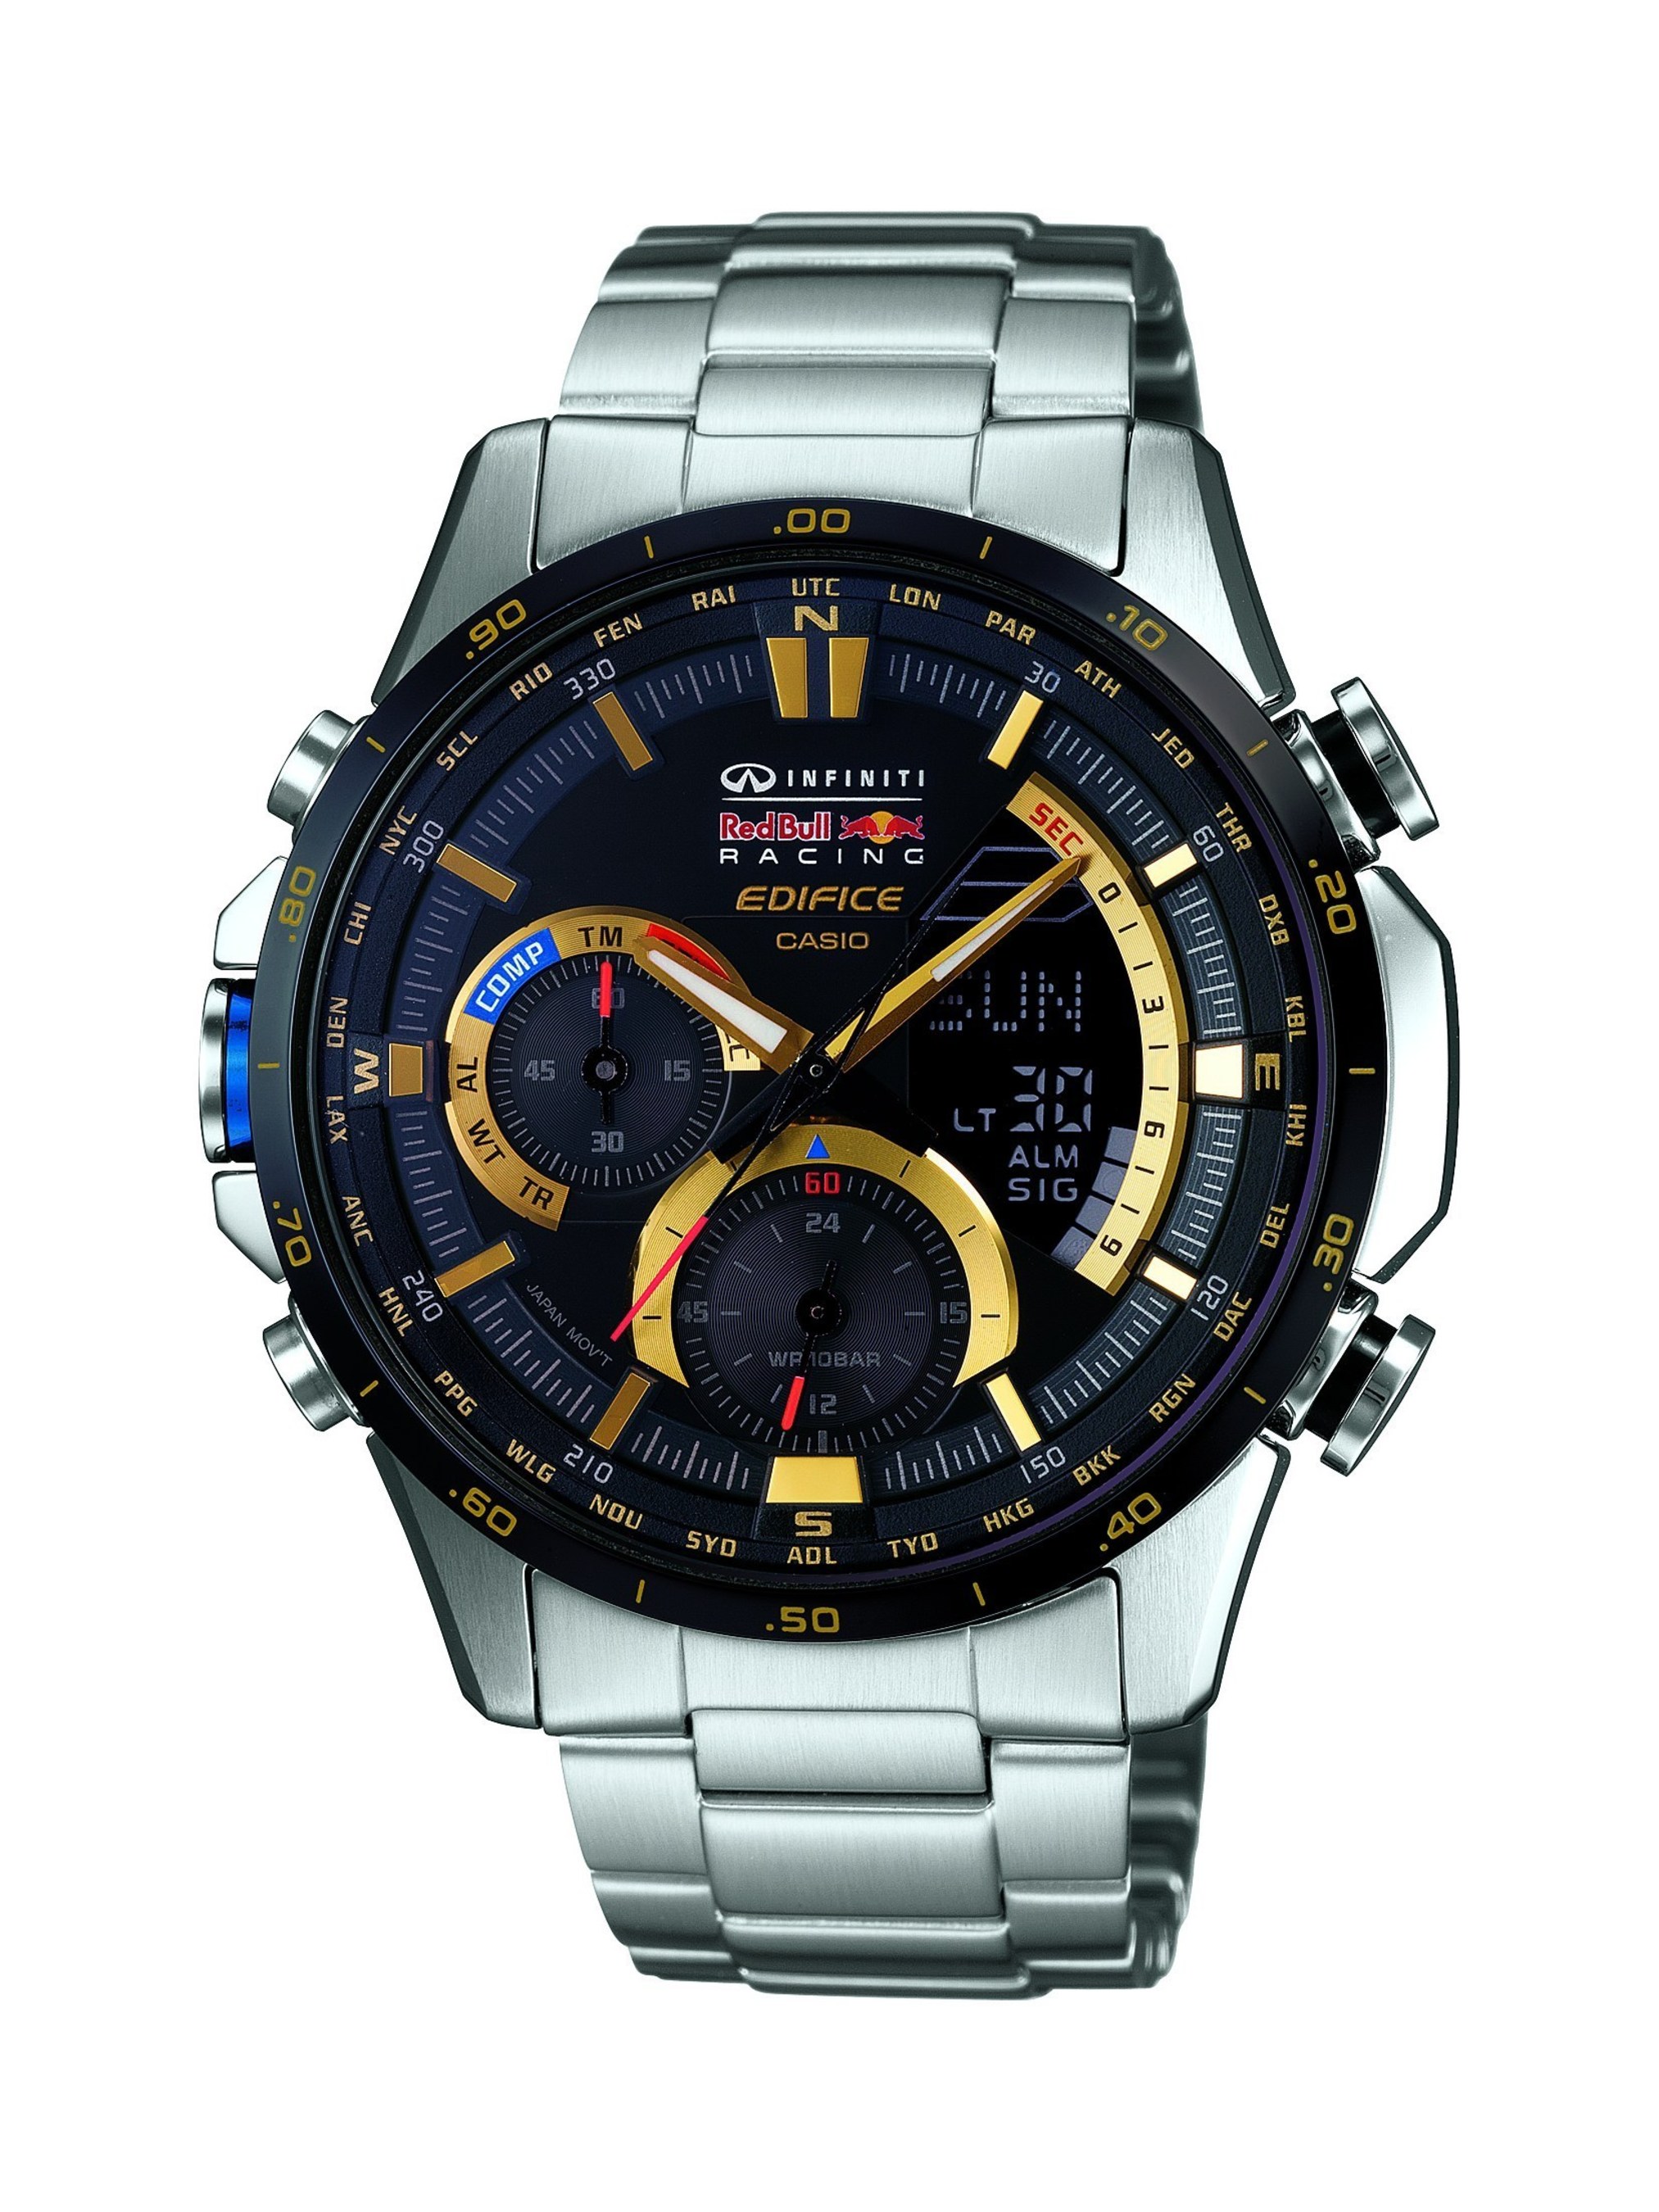 Casio's EDIFICE ERA300RB-1A is the latest limited edition Infiniti Red Bull Racing timepiece.